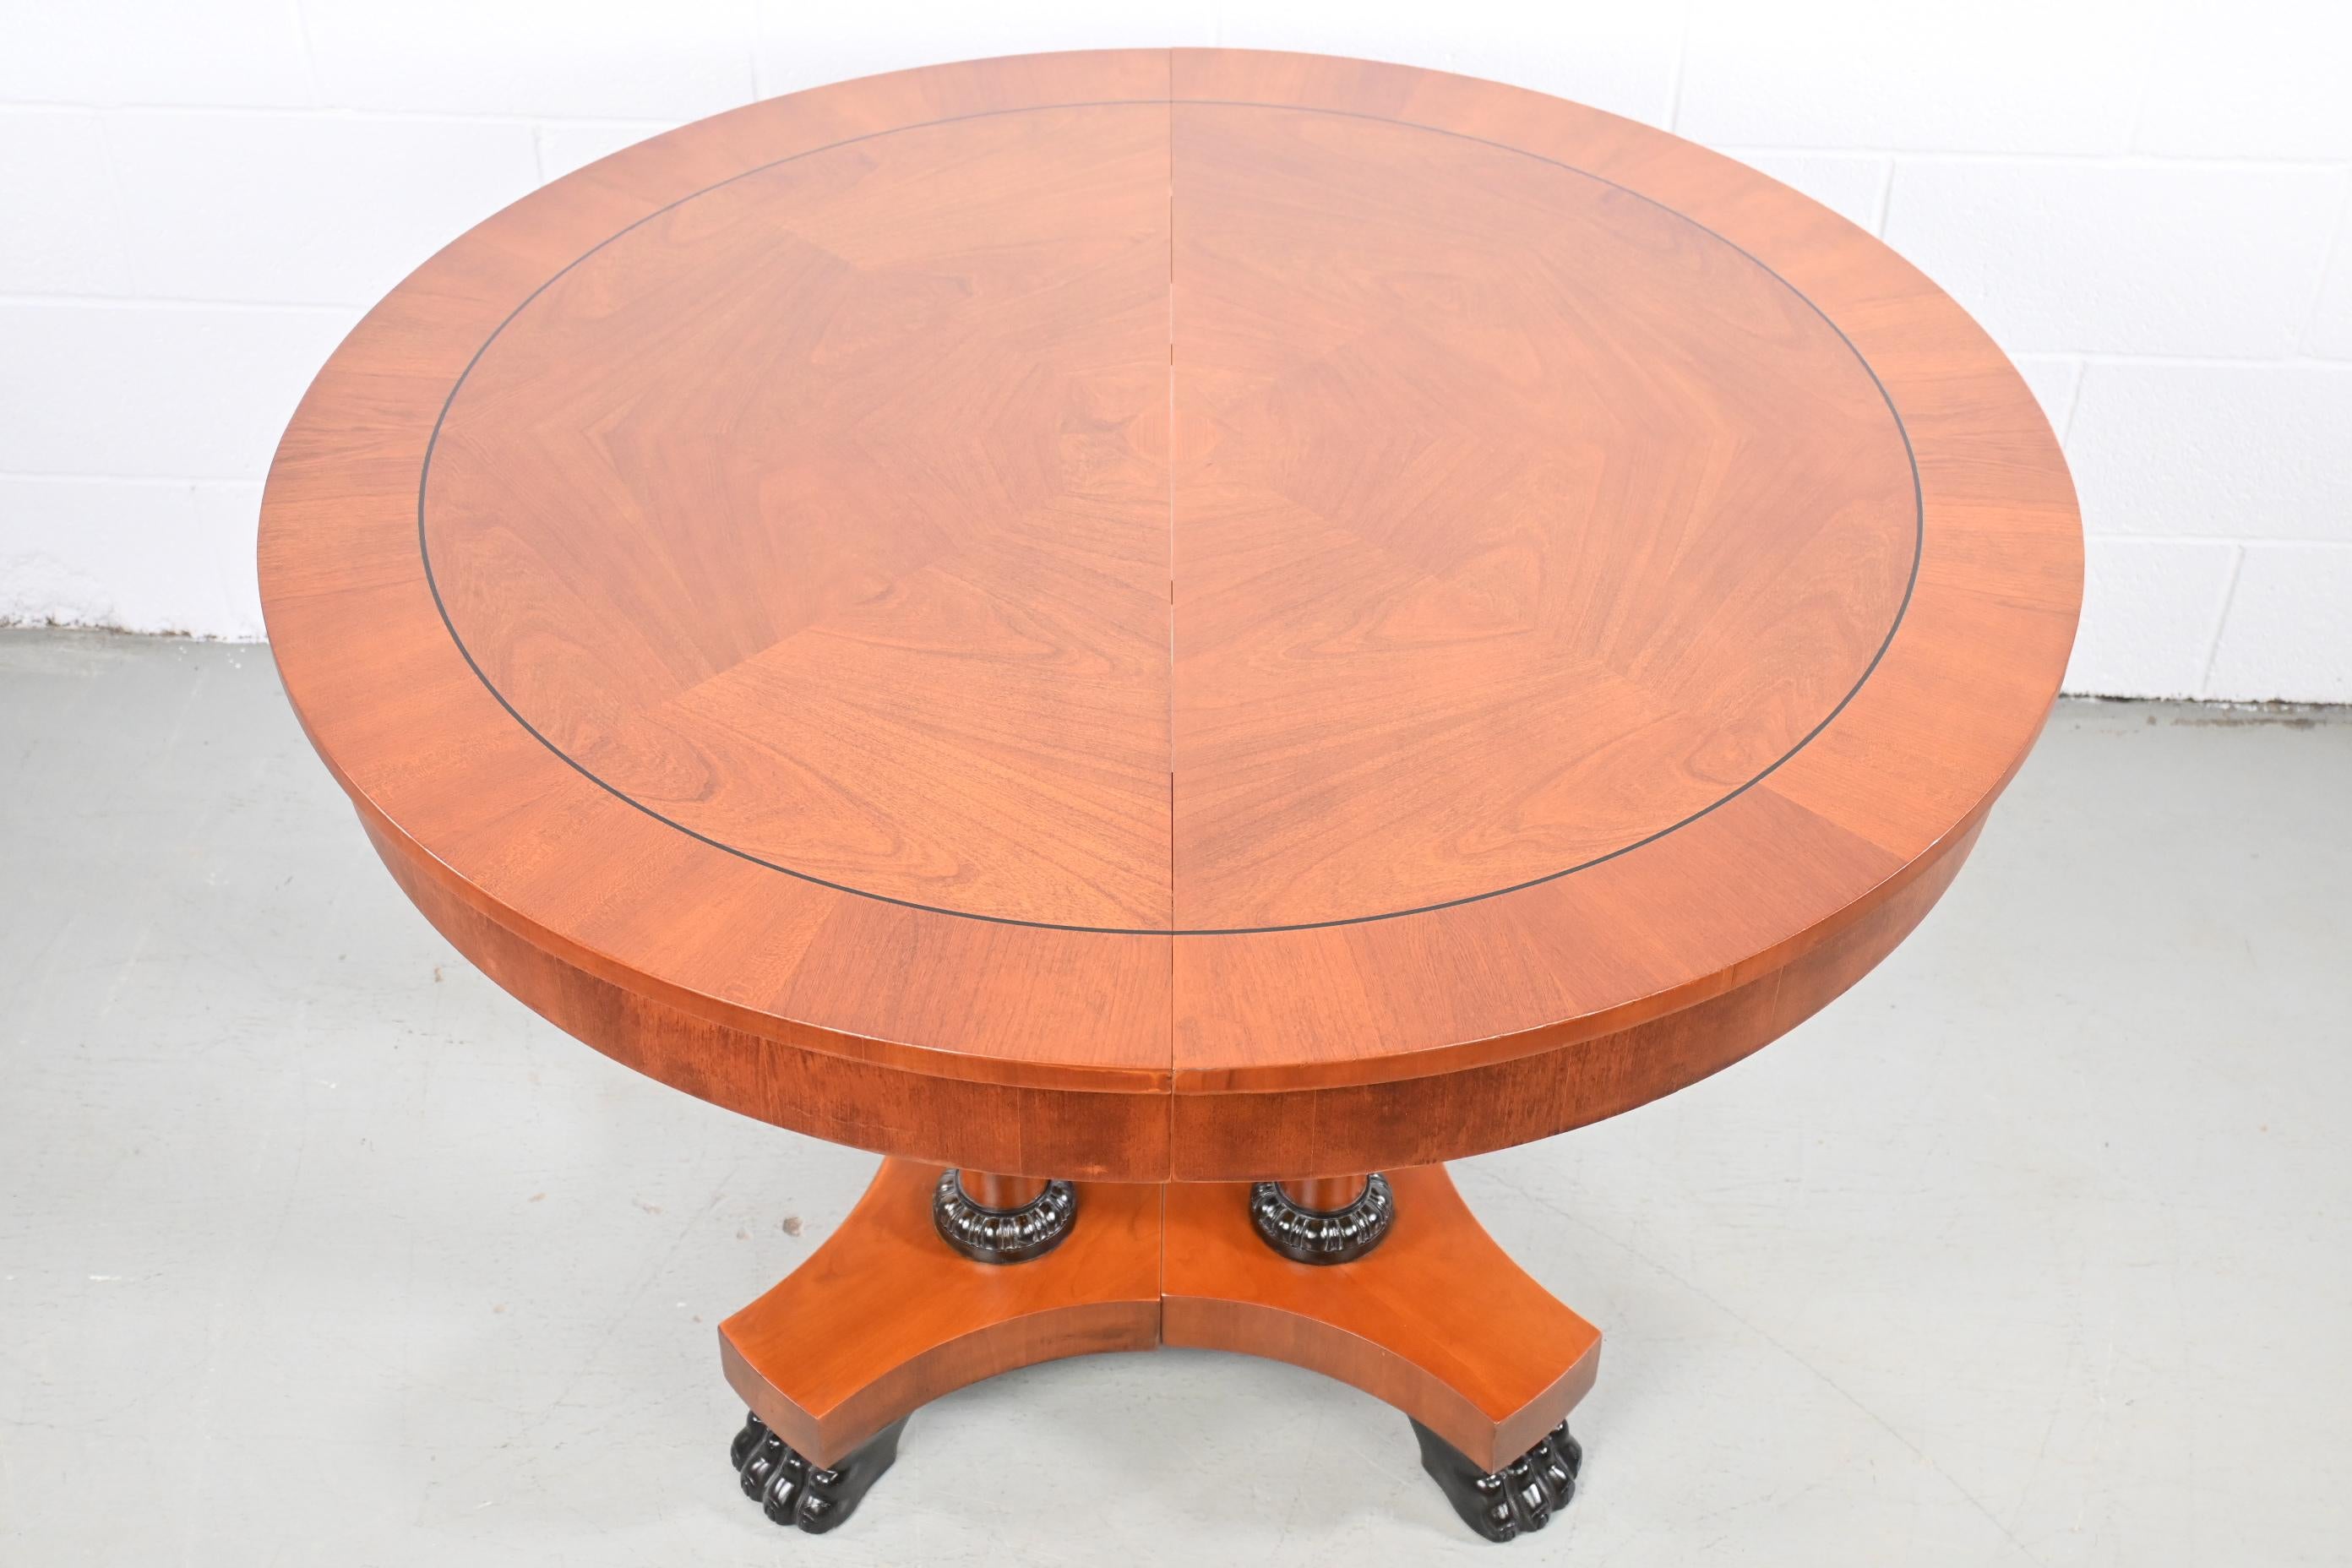 Baker Furniture Palladian Round Extension Dining Table 5